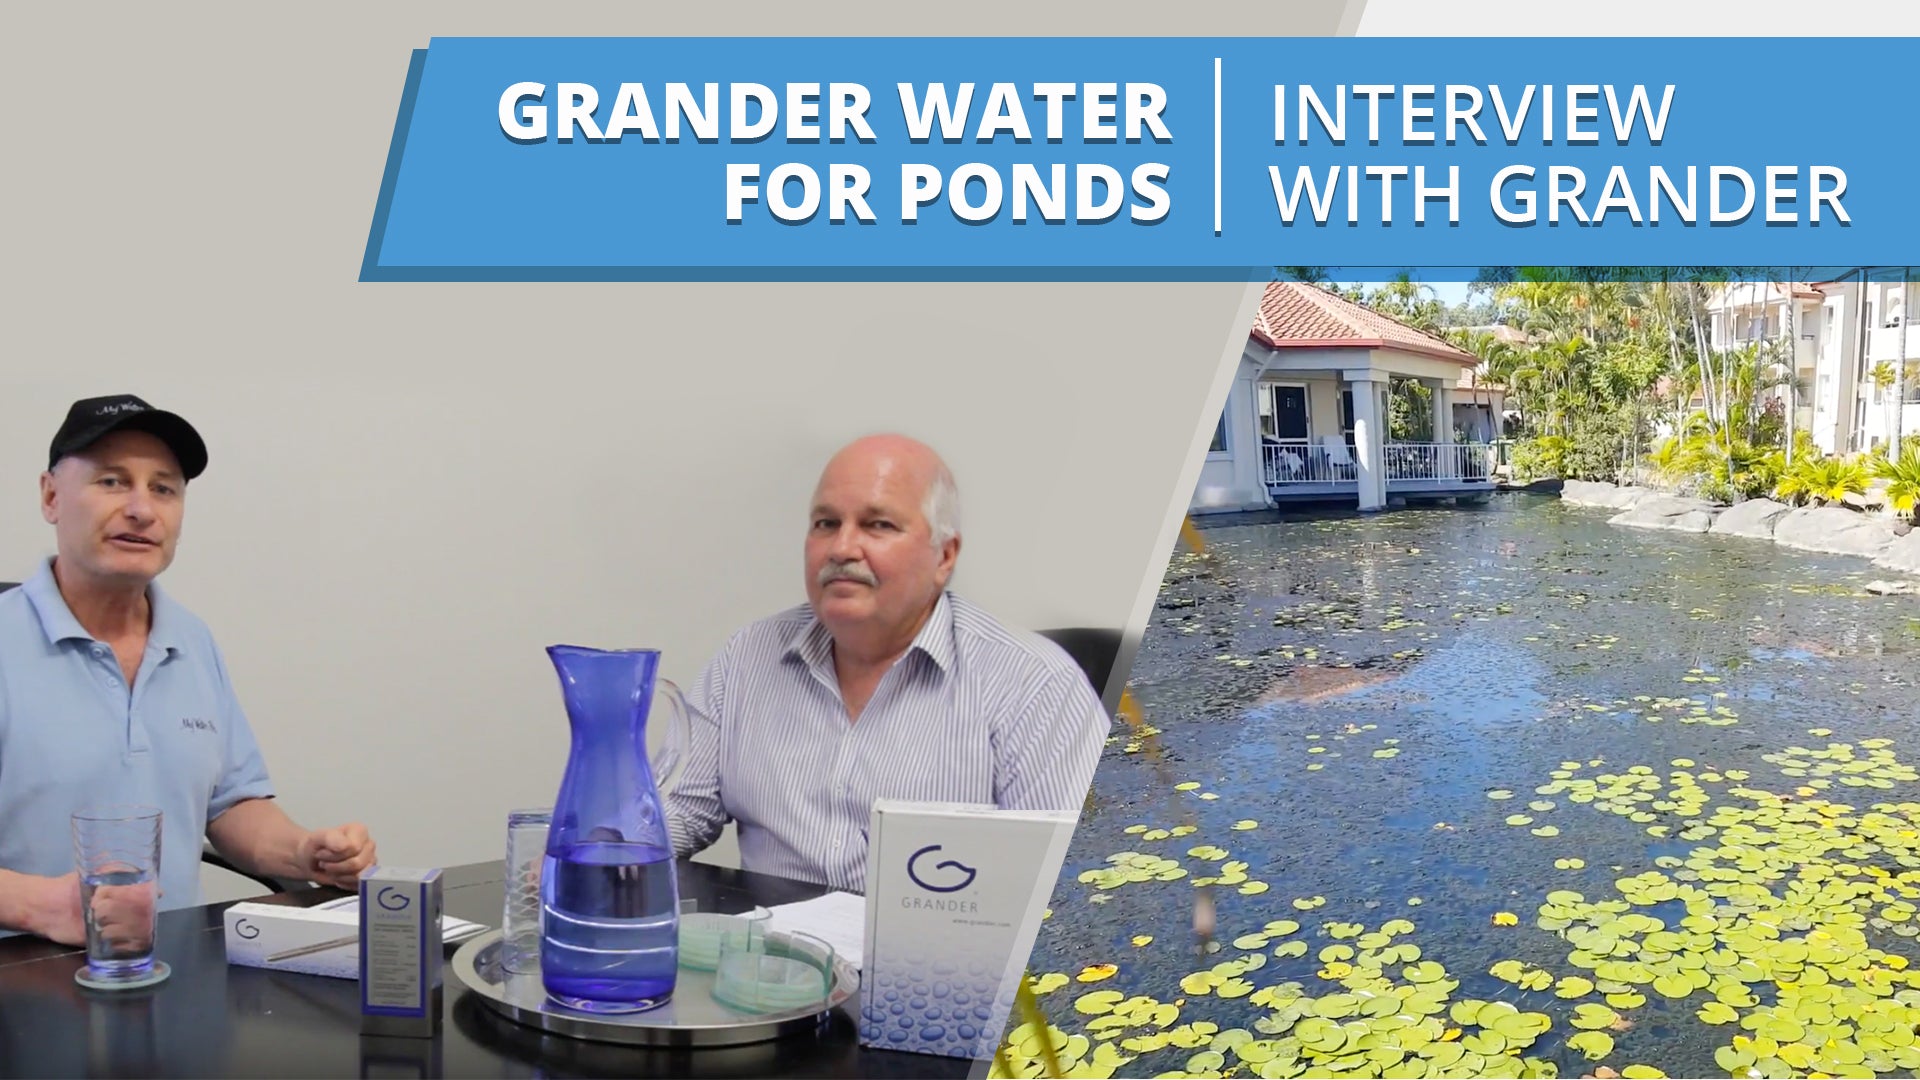 Grander Water for Ponds - Interview with Wayne from Grander [VIDEO] 